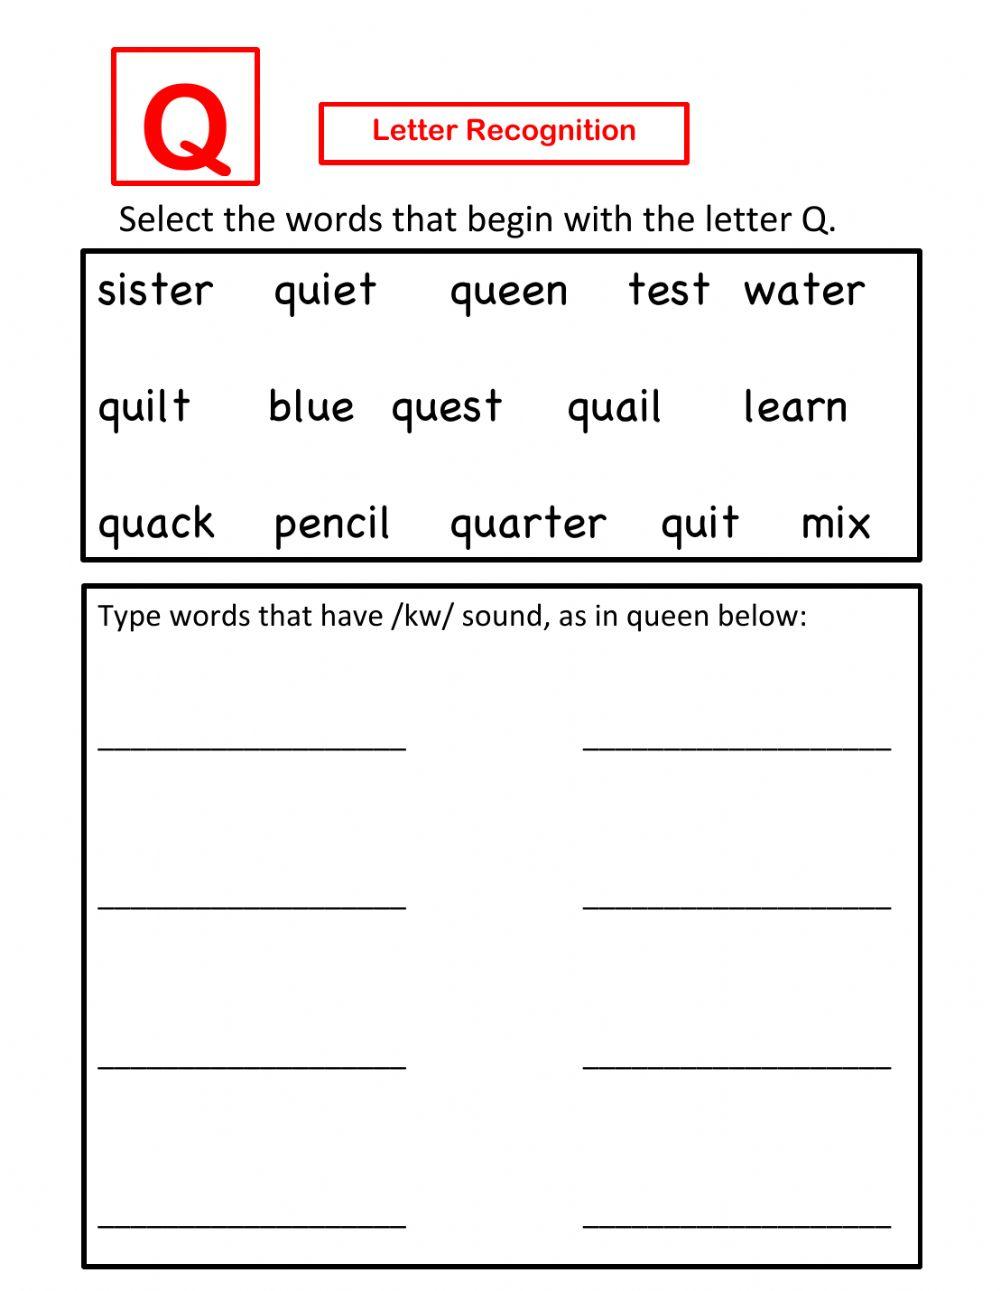 Letter Q recognition - Select and Write